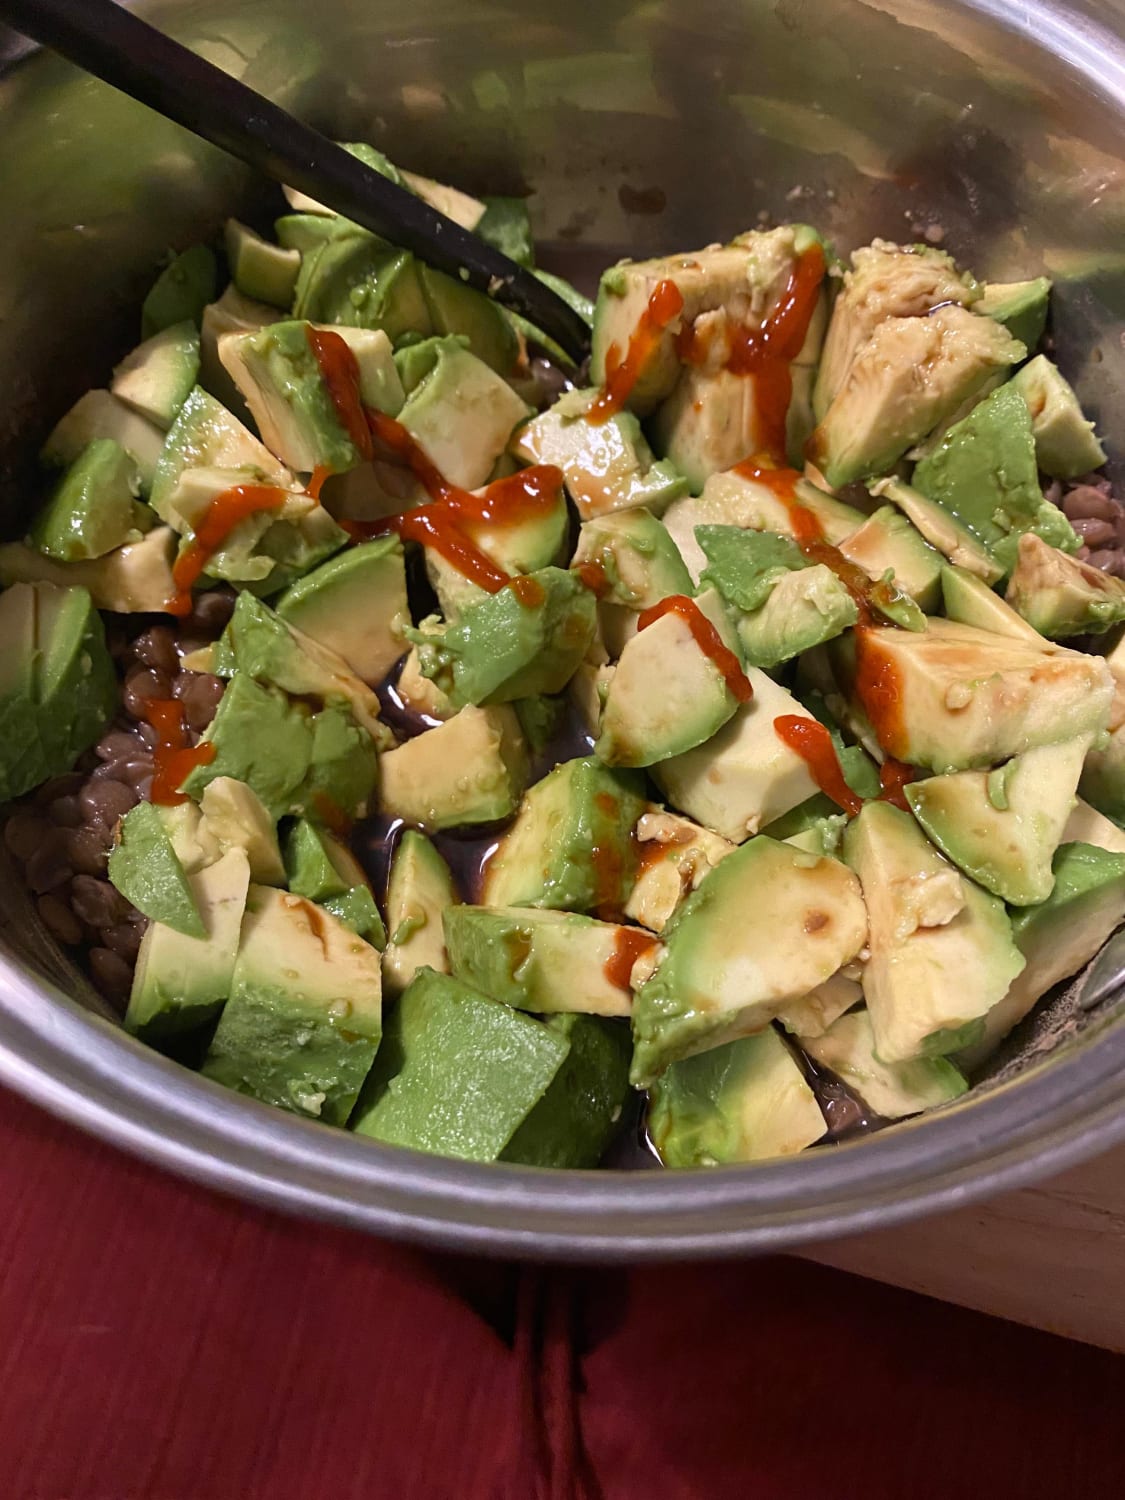 One of my favorite meals and very simple: Lentils (I swear they’re in there), aminos, sriracha, and 2 avocados - about 700 calories and 25g of protein.